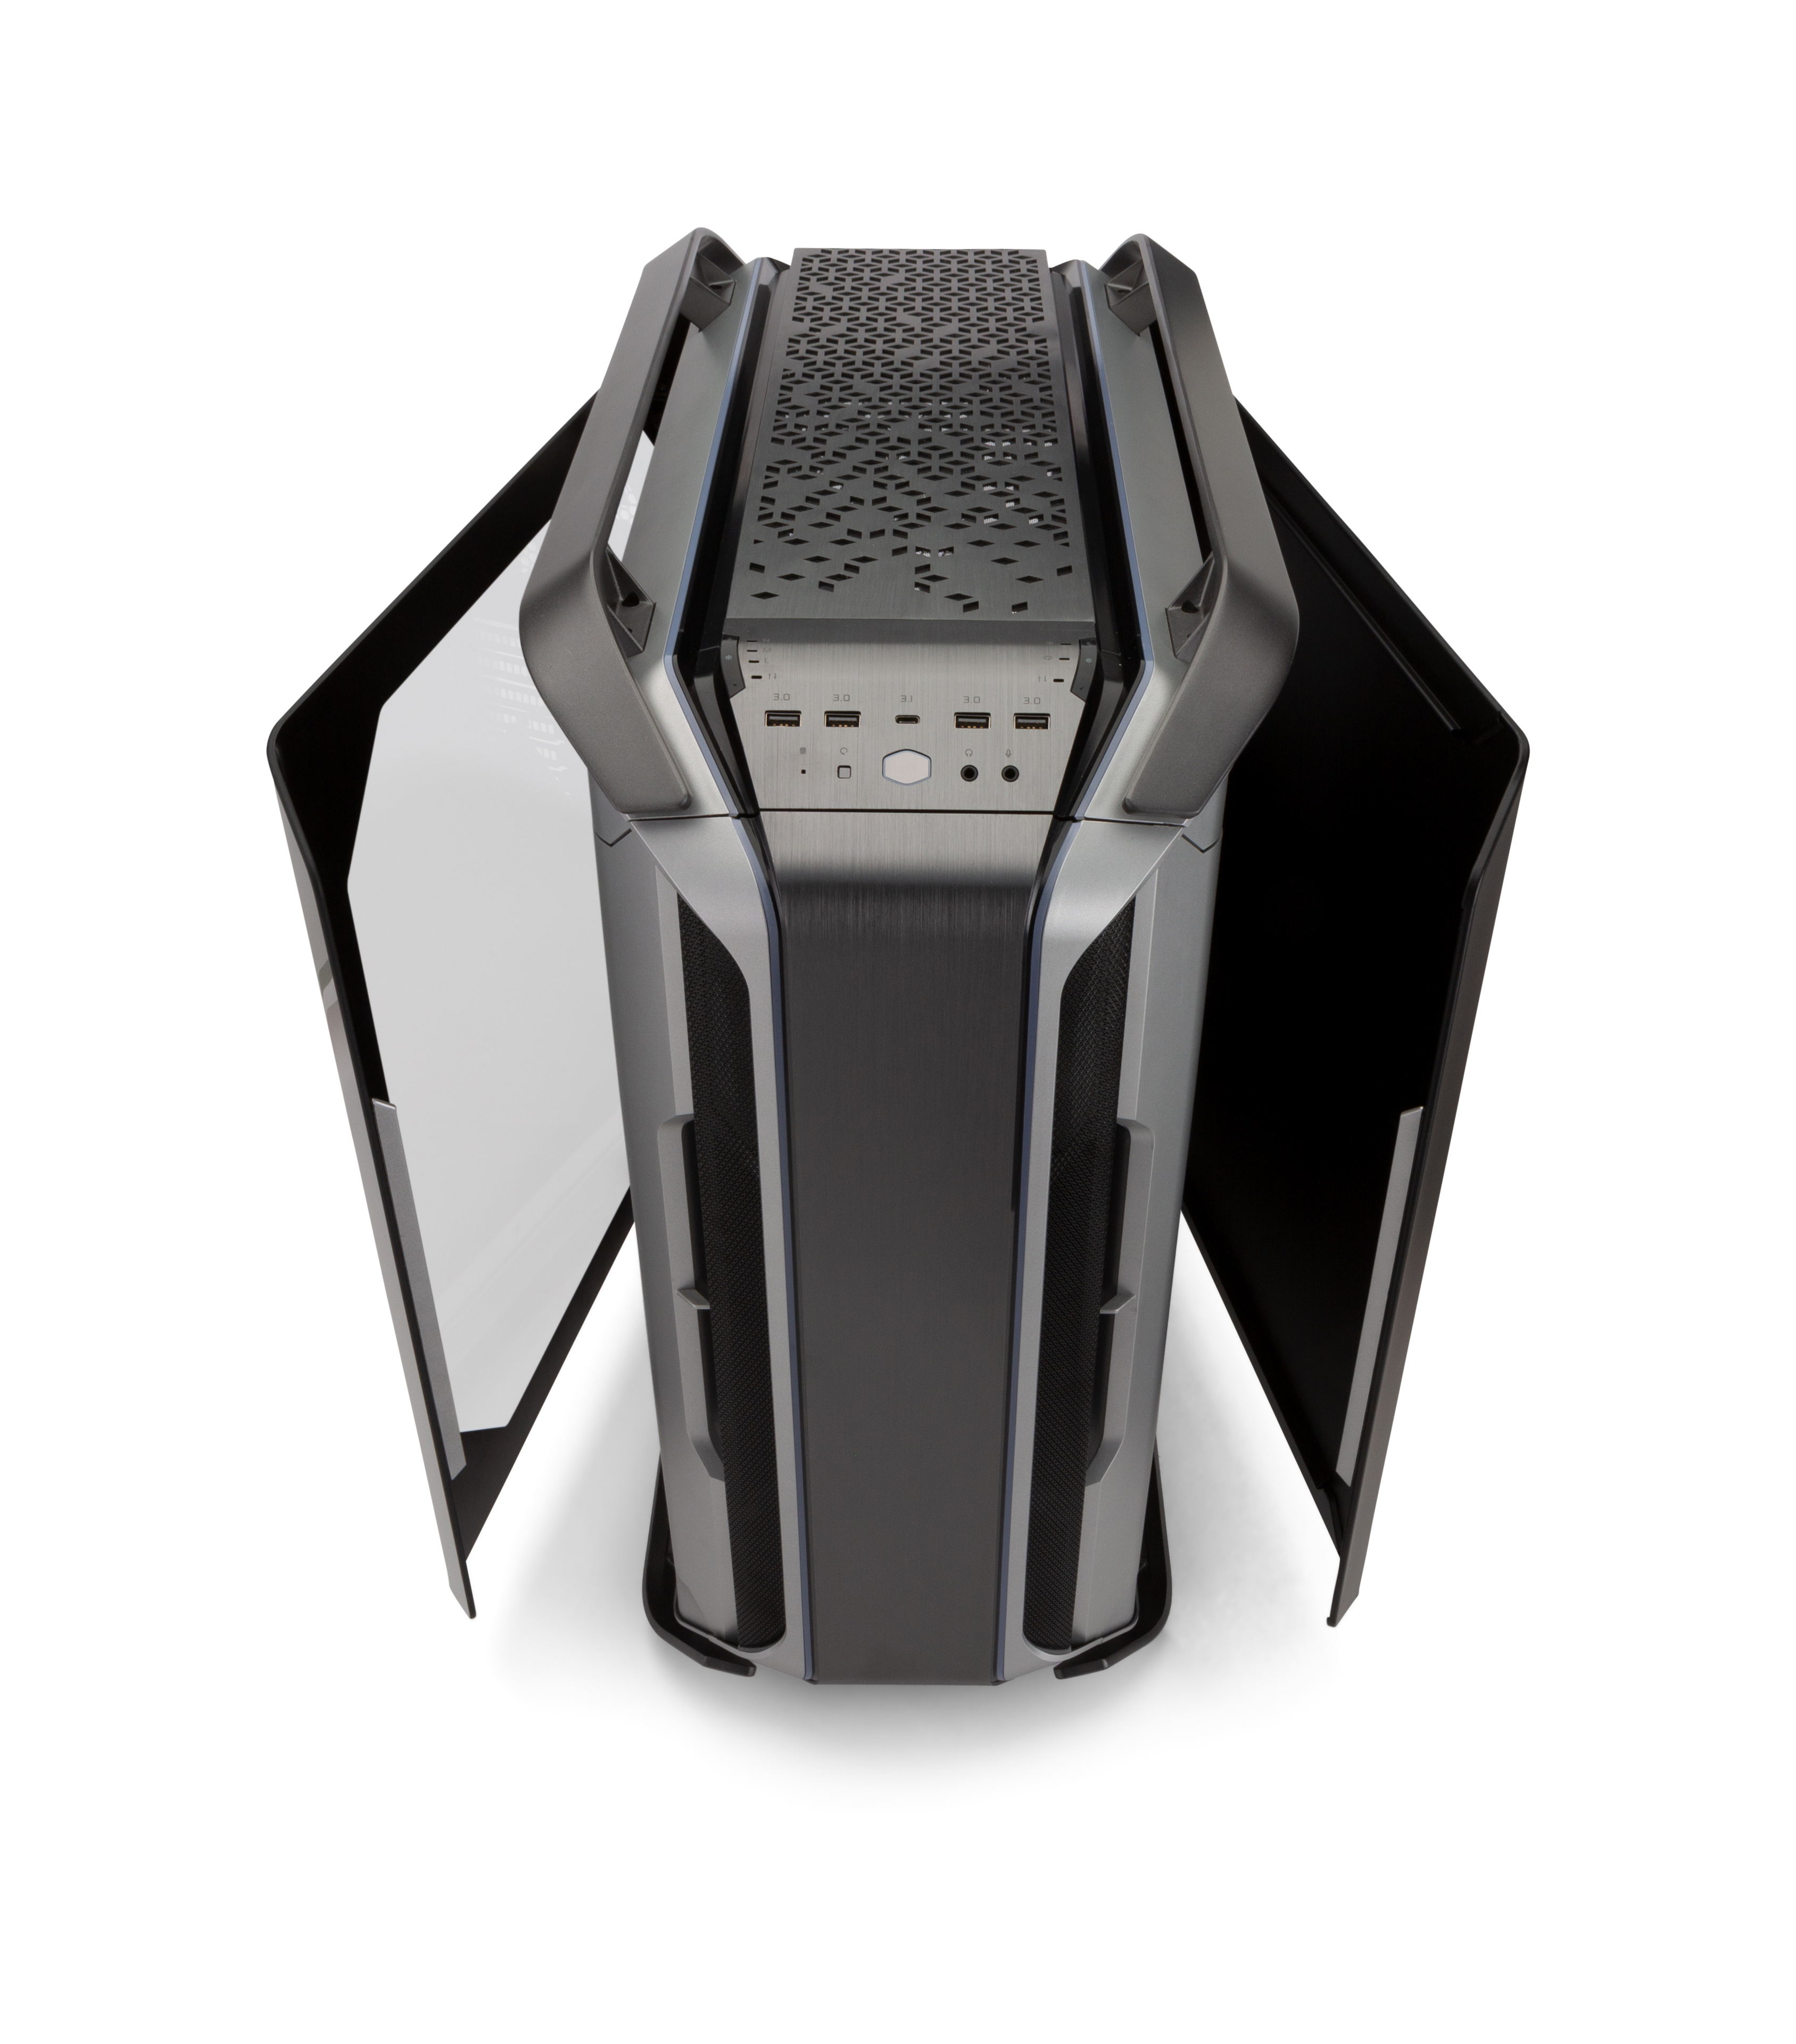 Cooler Master Announces the Release of the COSMOS C700M